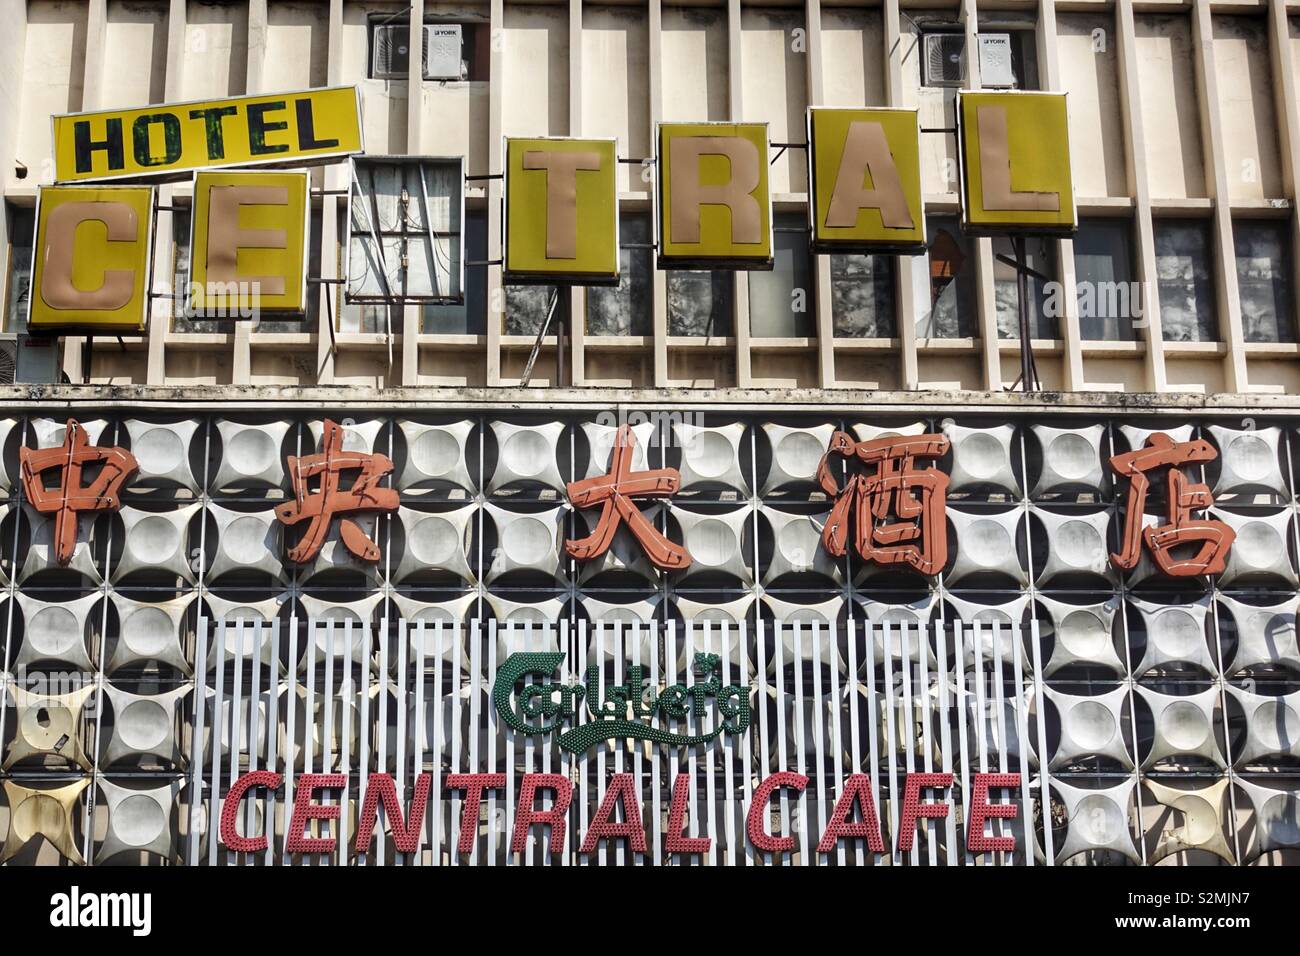 Vintage facade of an old and abandoned hotel. Hotel central in Ipoh, Malaysia Stock Photo